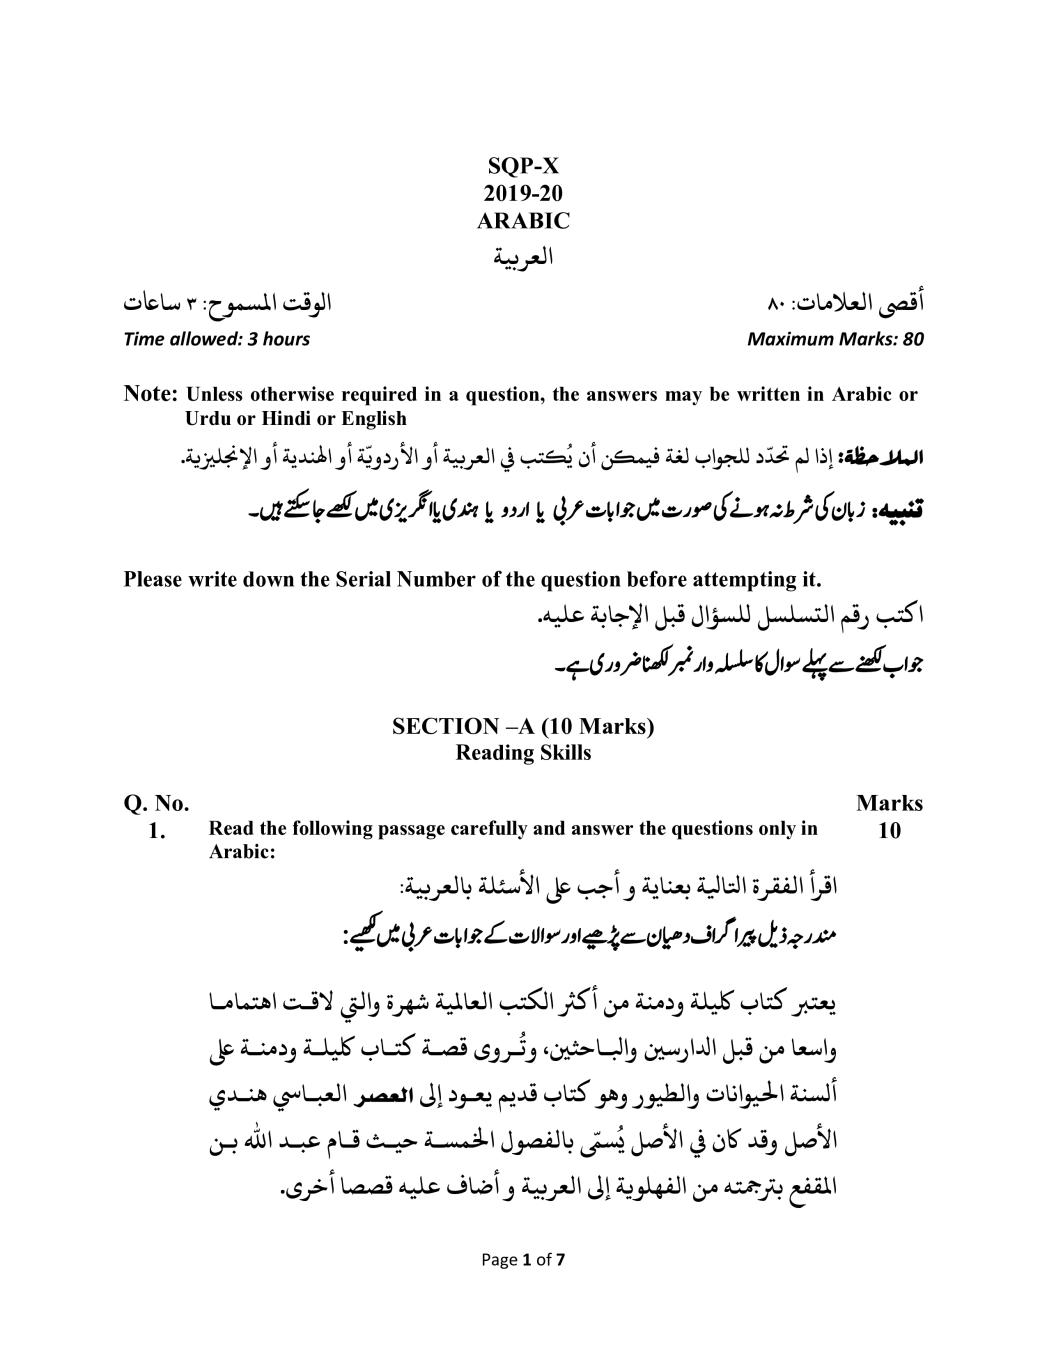 CBSE Class 10 Sample Paper 2020 for Arabic - Page 1